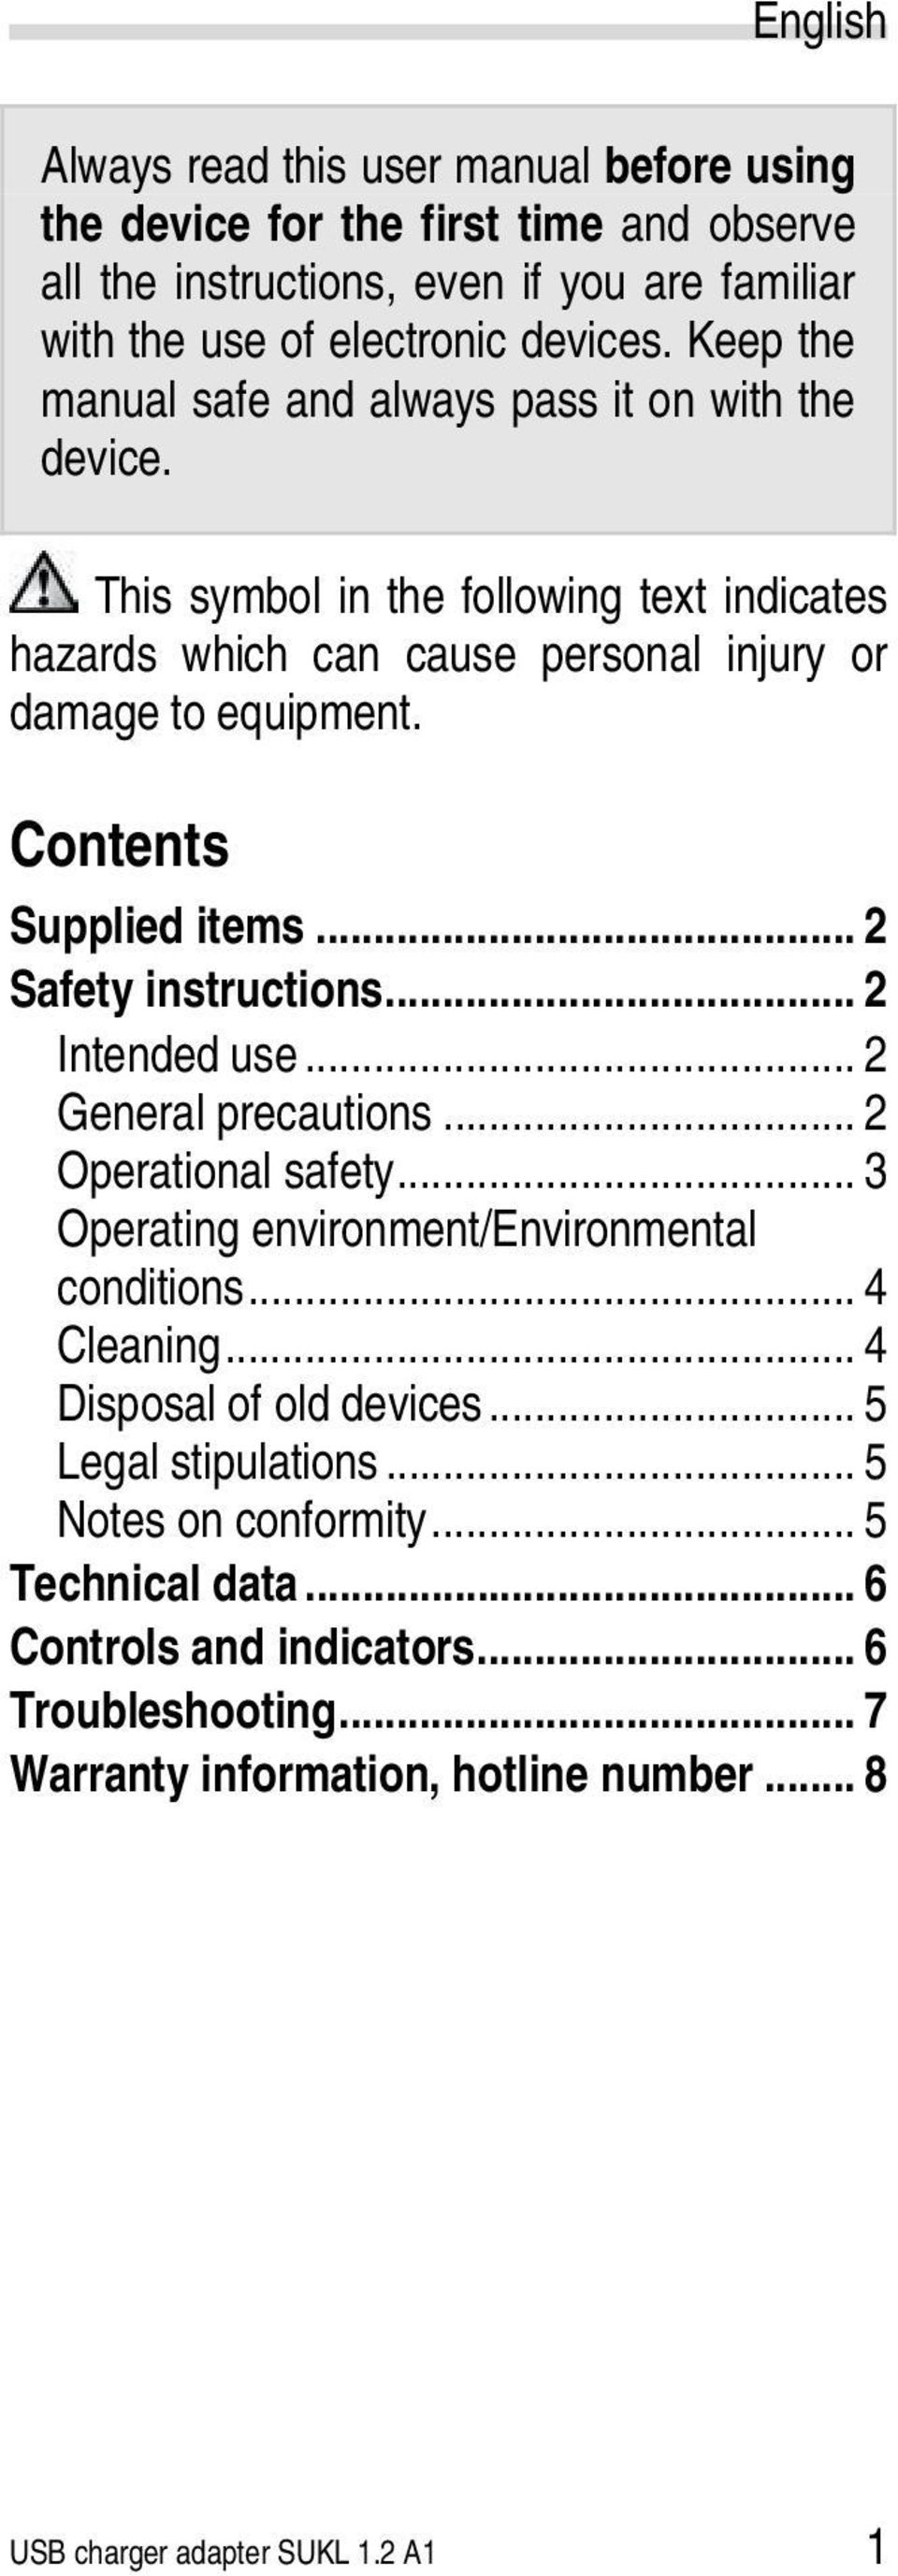 Contents Supplied items... 2 Safety instructions... 2 Intended use... 2 General precautions... 2 Operational safety... 3 Operating environment/environmental conditions... 4 Cleaning.